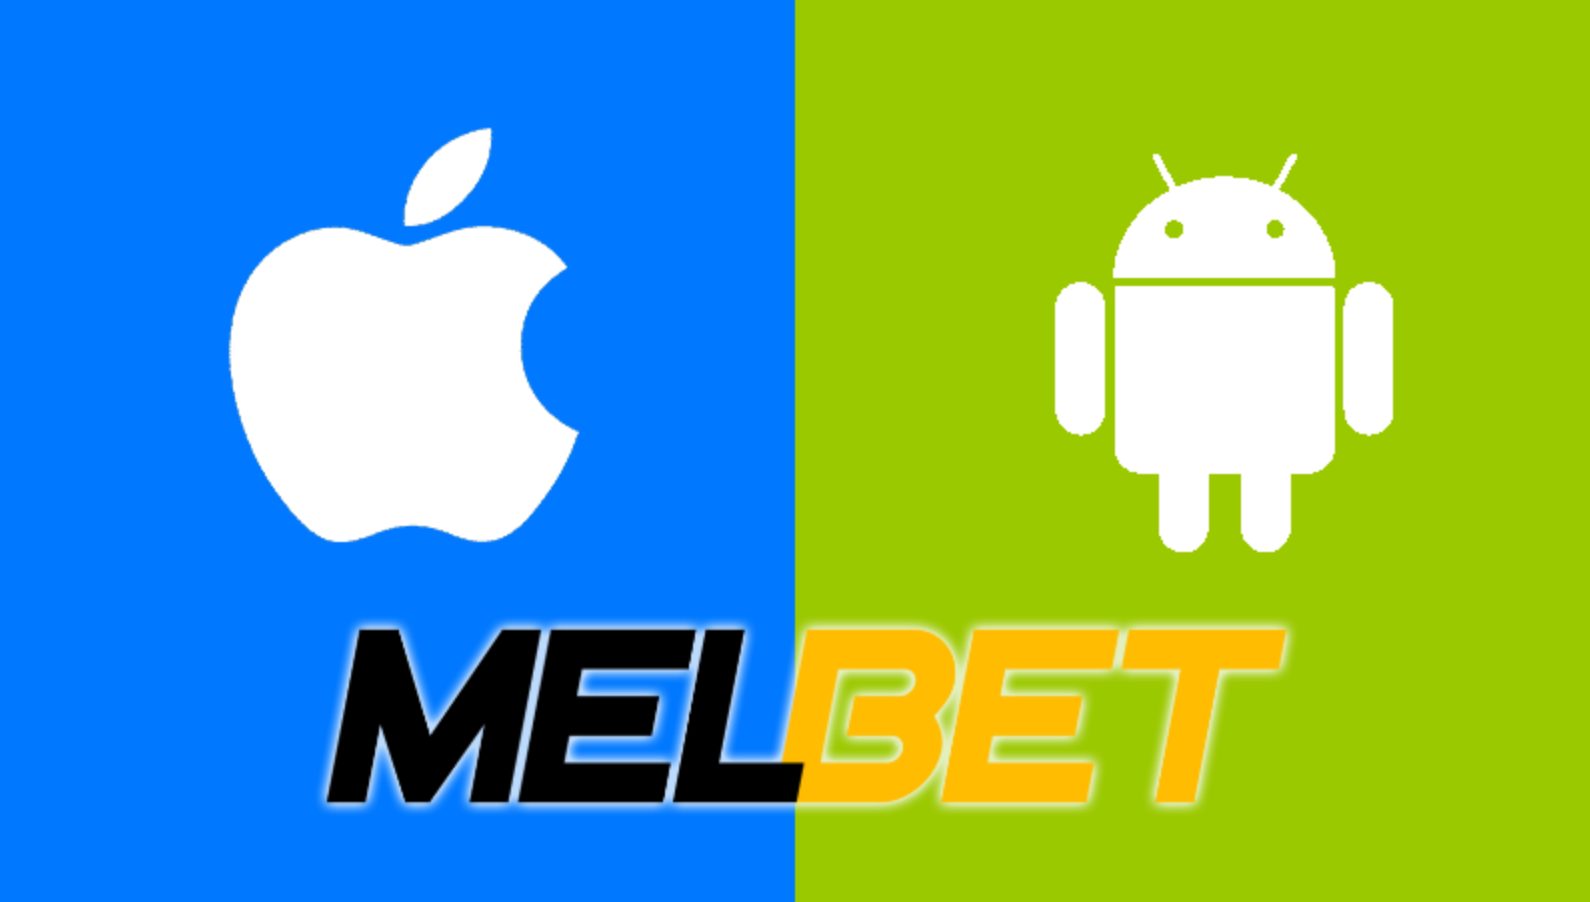 Melbet APK file for Android